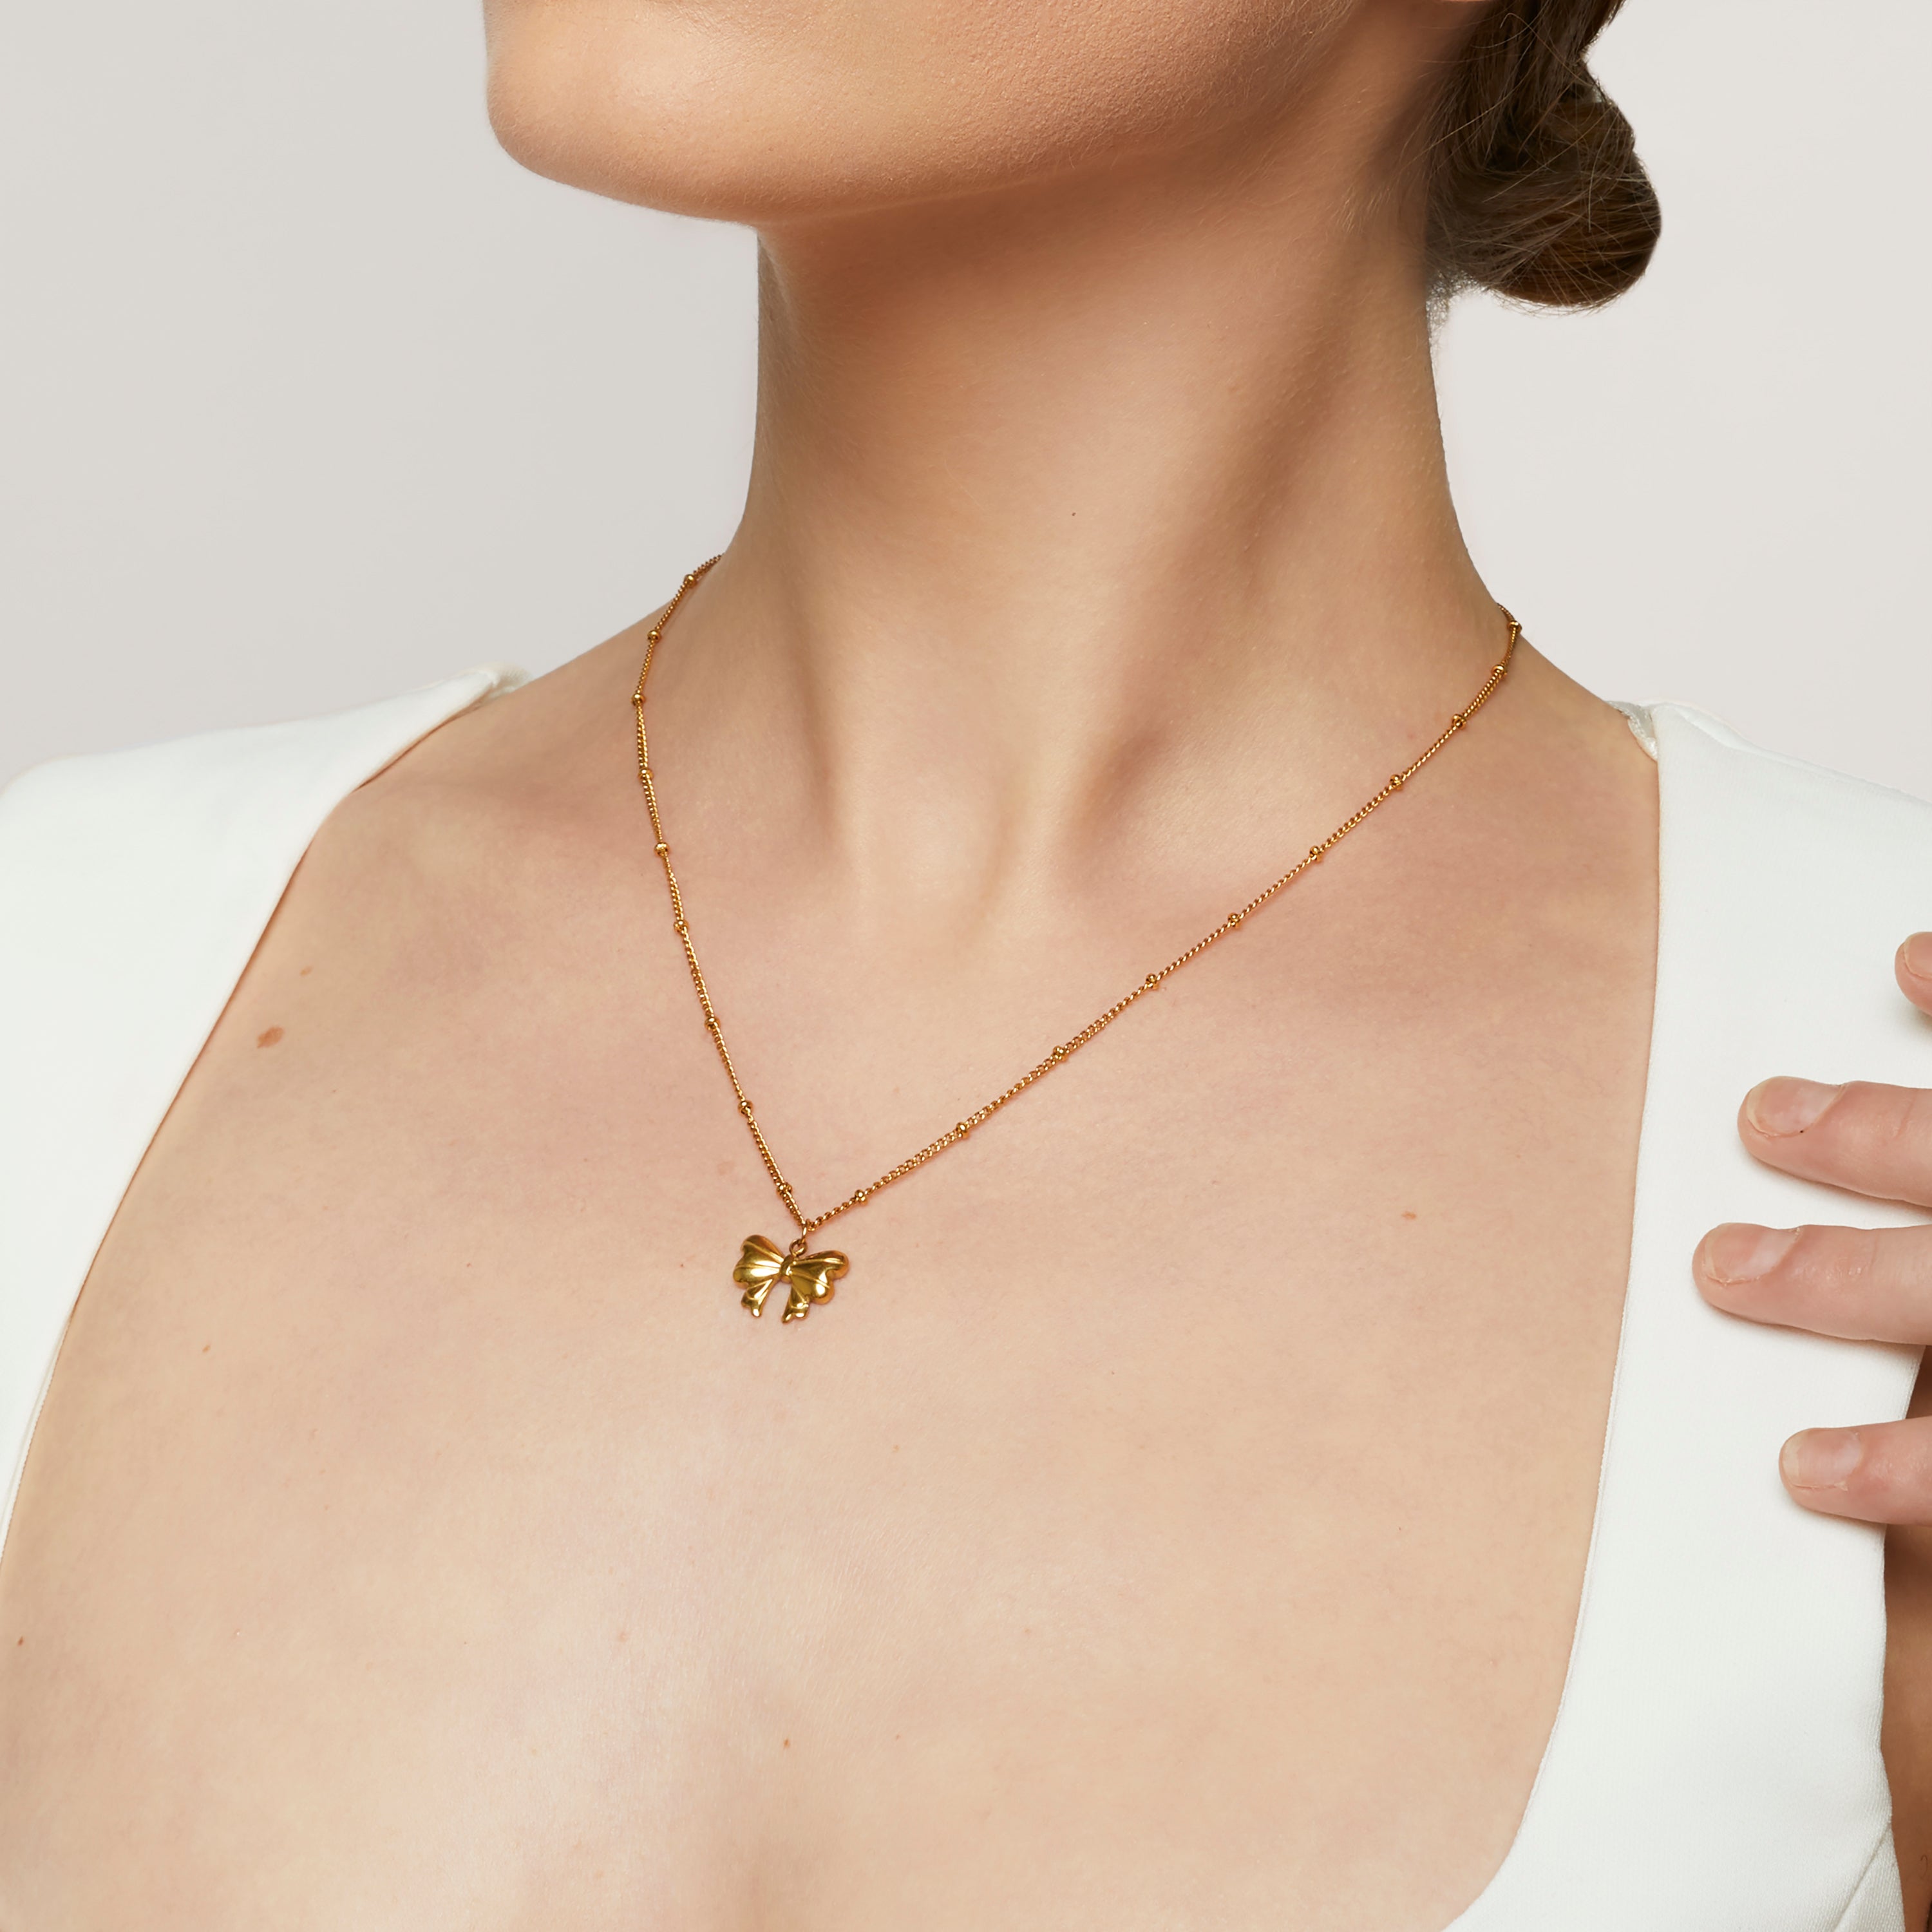 A model wearing the Wendy Necklace - the perfect combination of style and durability. This versatile accessory, made from non-tarnish 18K gold-plated stainless steel, is water-resistant and suitable for any occasion. With its adjustable design, it's the only necklace you'll ever need.